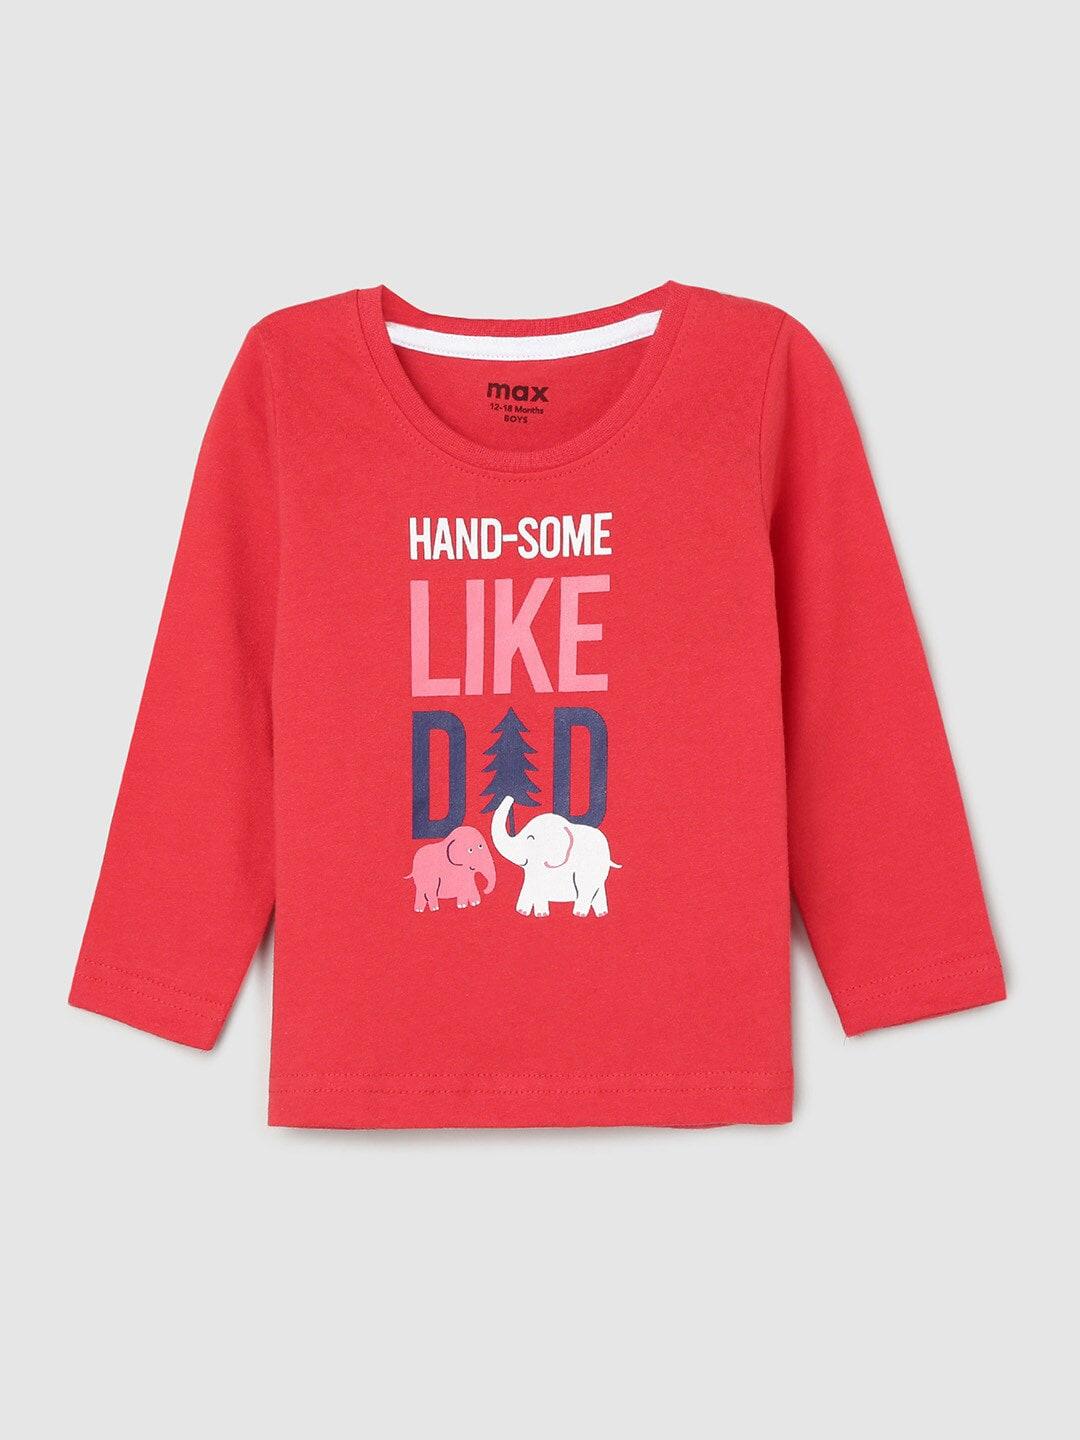 max boys red typography printed cotton t-shirt